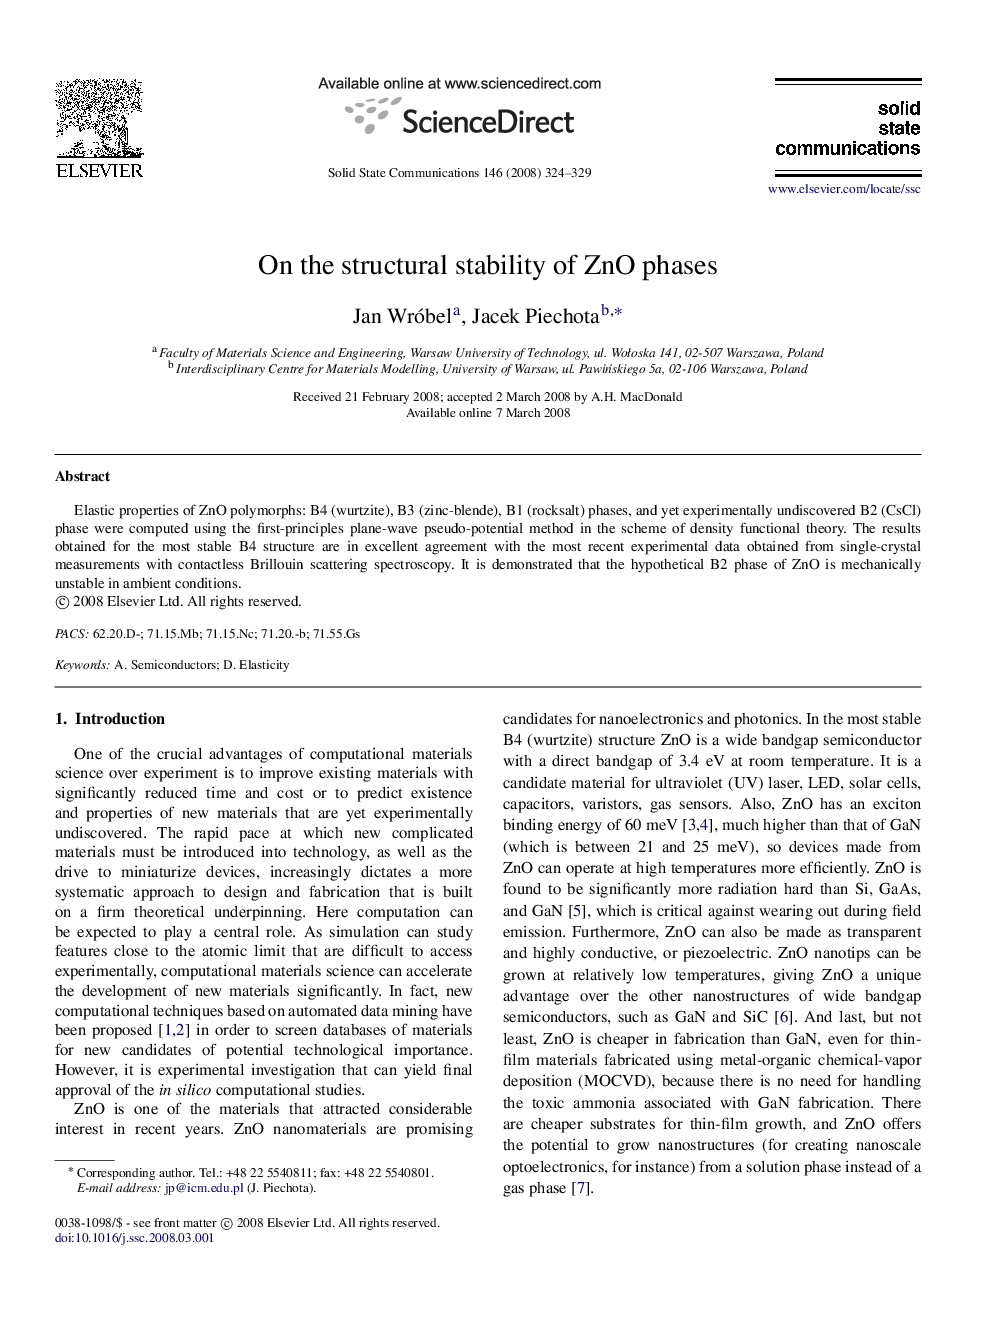 On the structural stability of ZnO phases